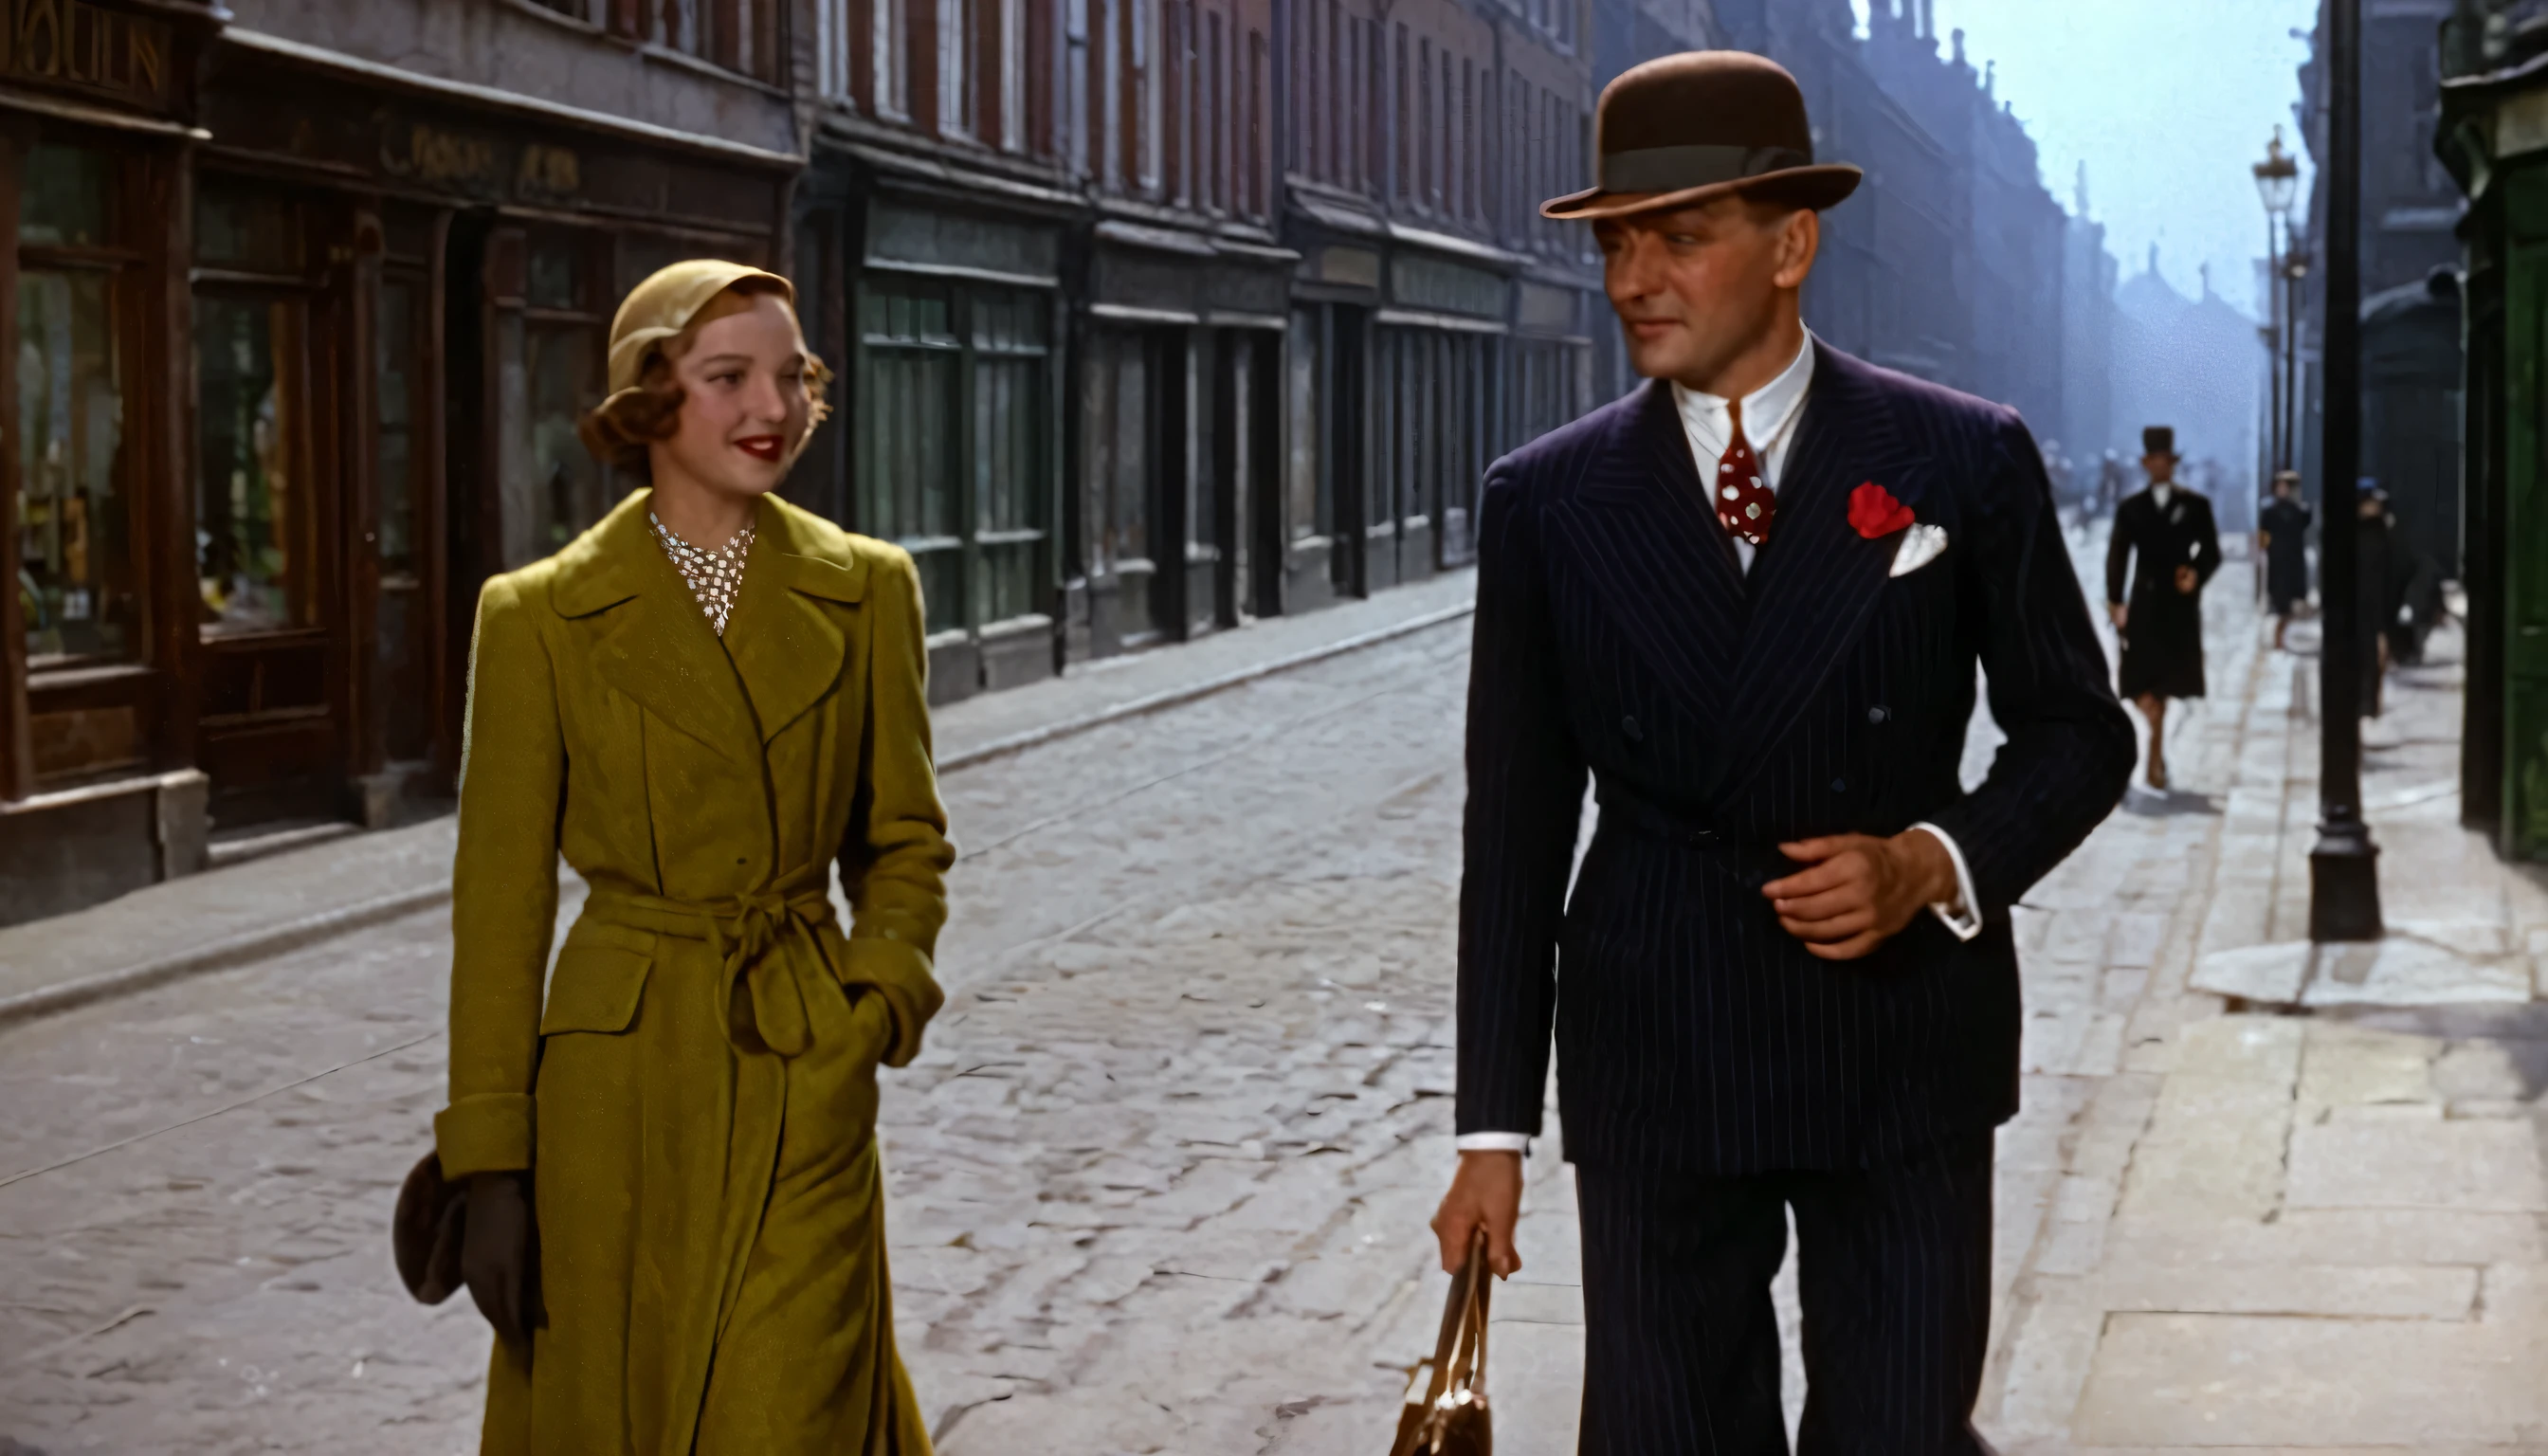 a lady and a gentleman walking on the street, 1930s